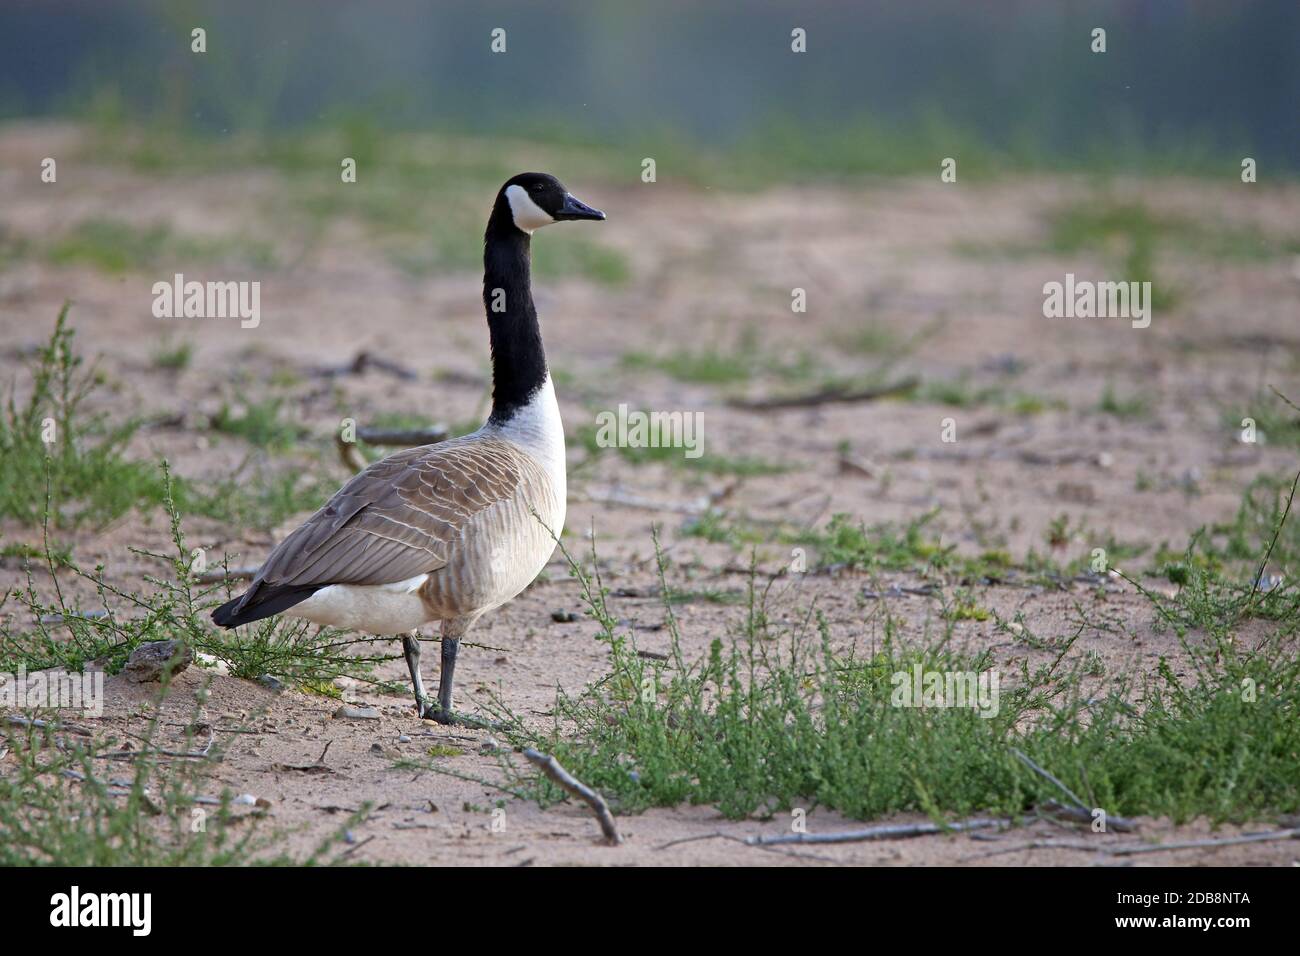 Lonely Canada goose Branta canadensis on rowing surface Stock Photo